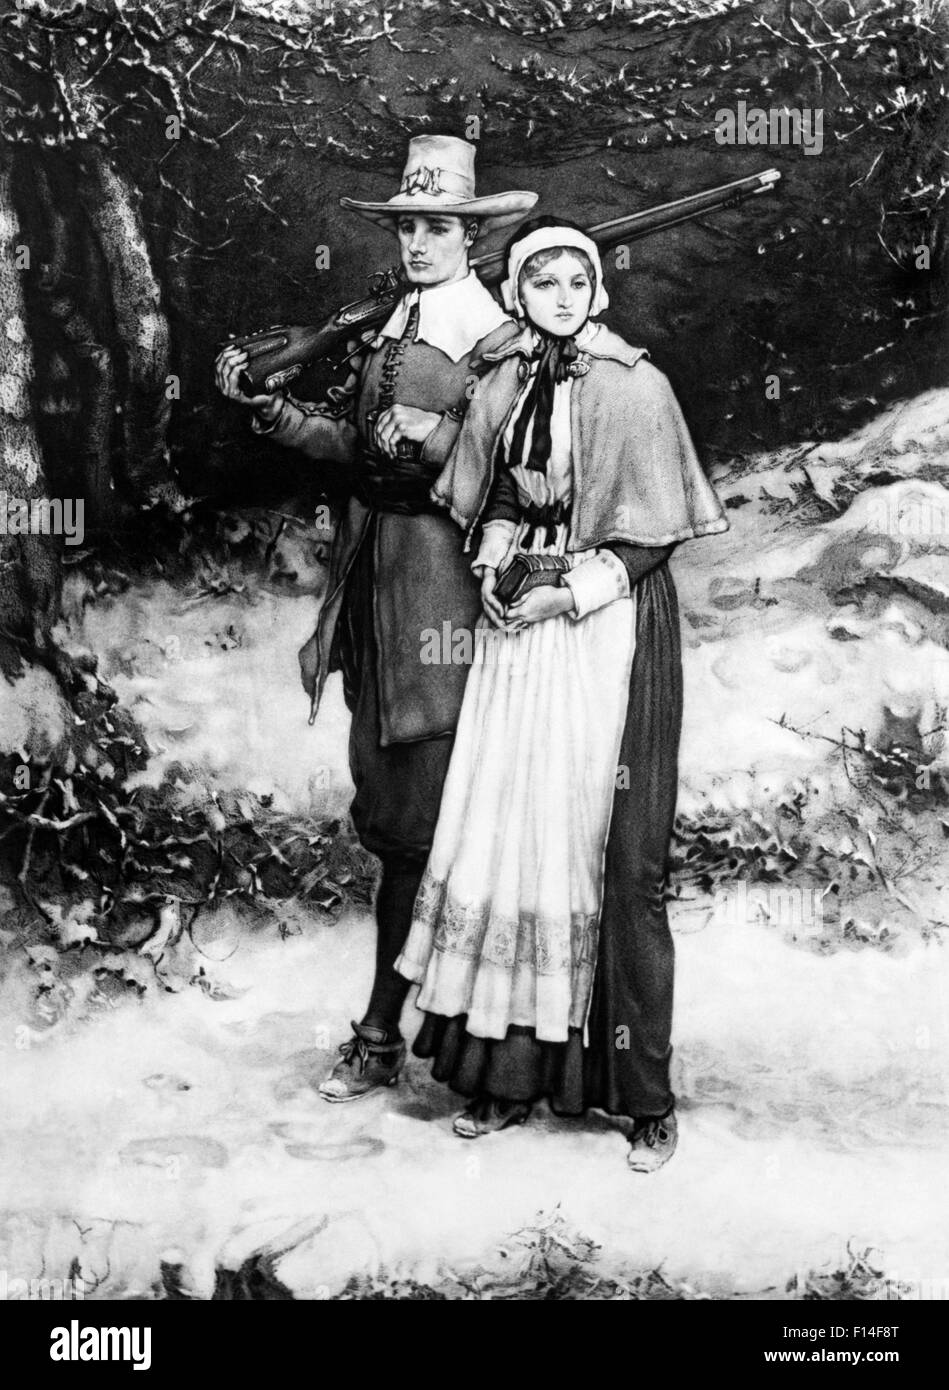 1620s JOHN ALDEN & PRISCILLA MULLINS BY BOUGHTON COLONIAL COUPLE MAN WOMAN PLYMOUTH COLONY MARRIED MAY 12, 1622 Stock Photo